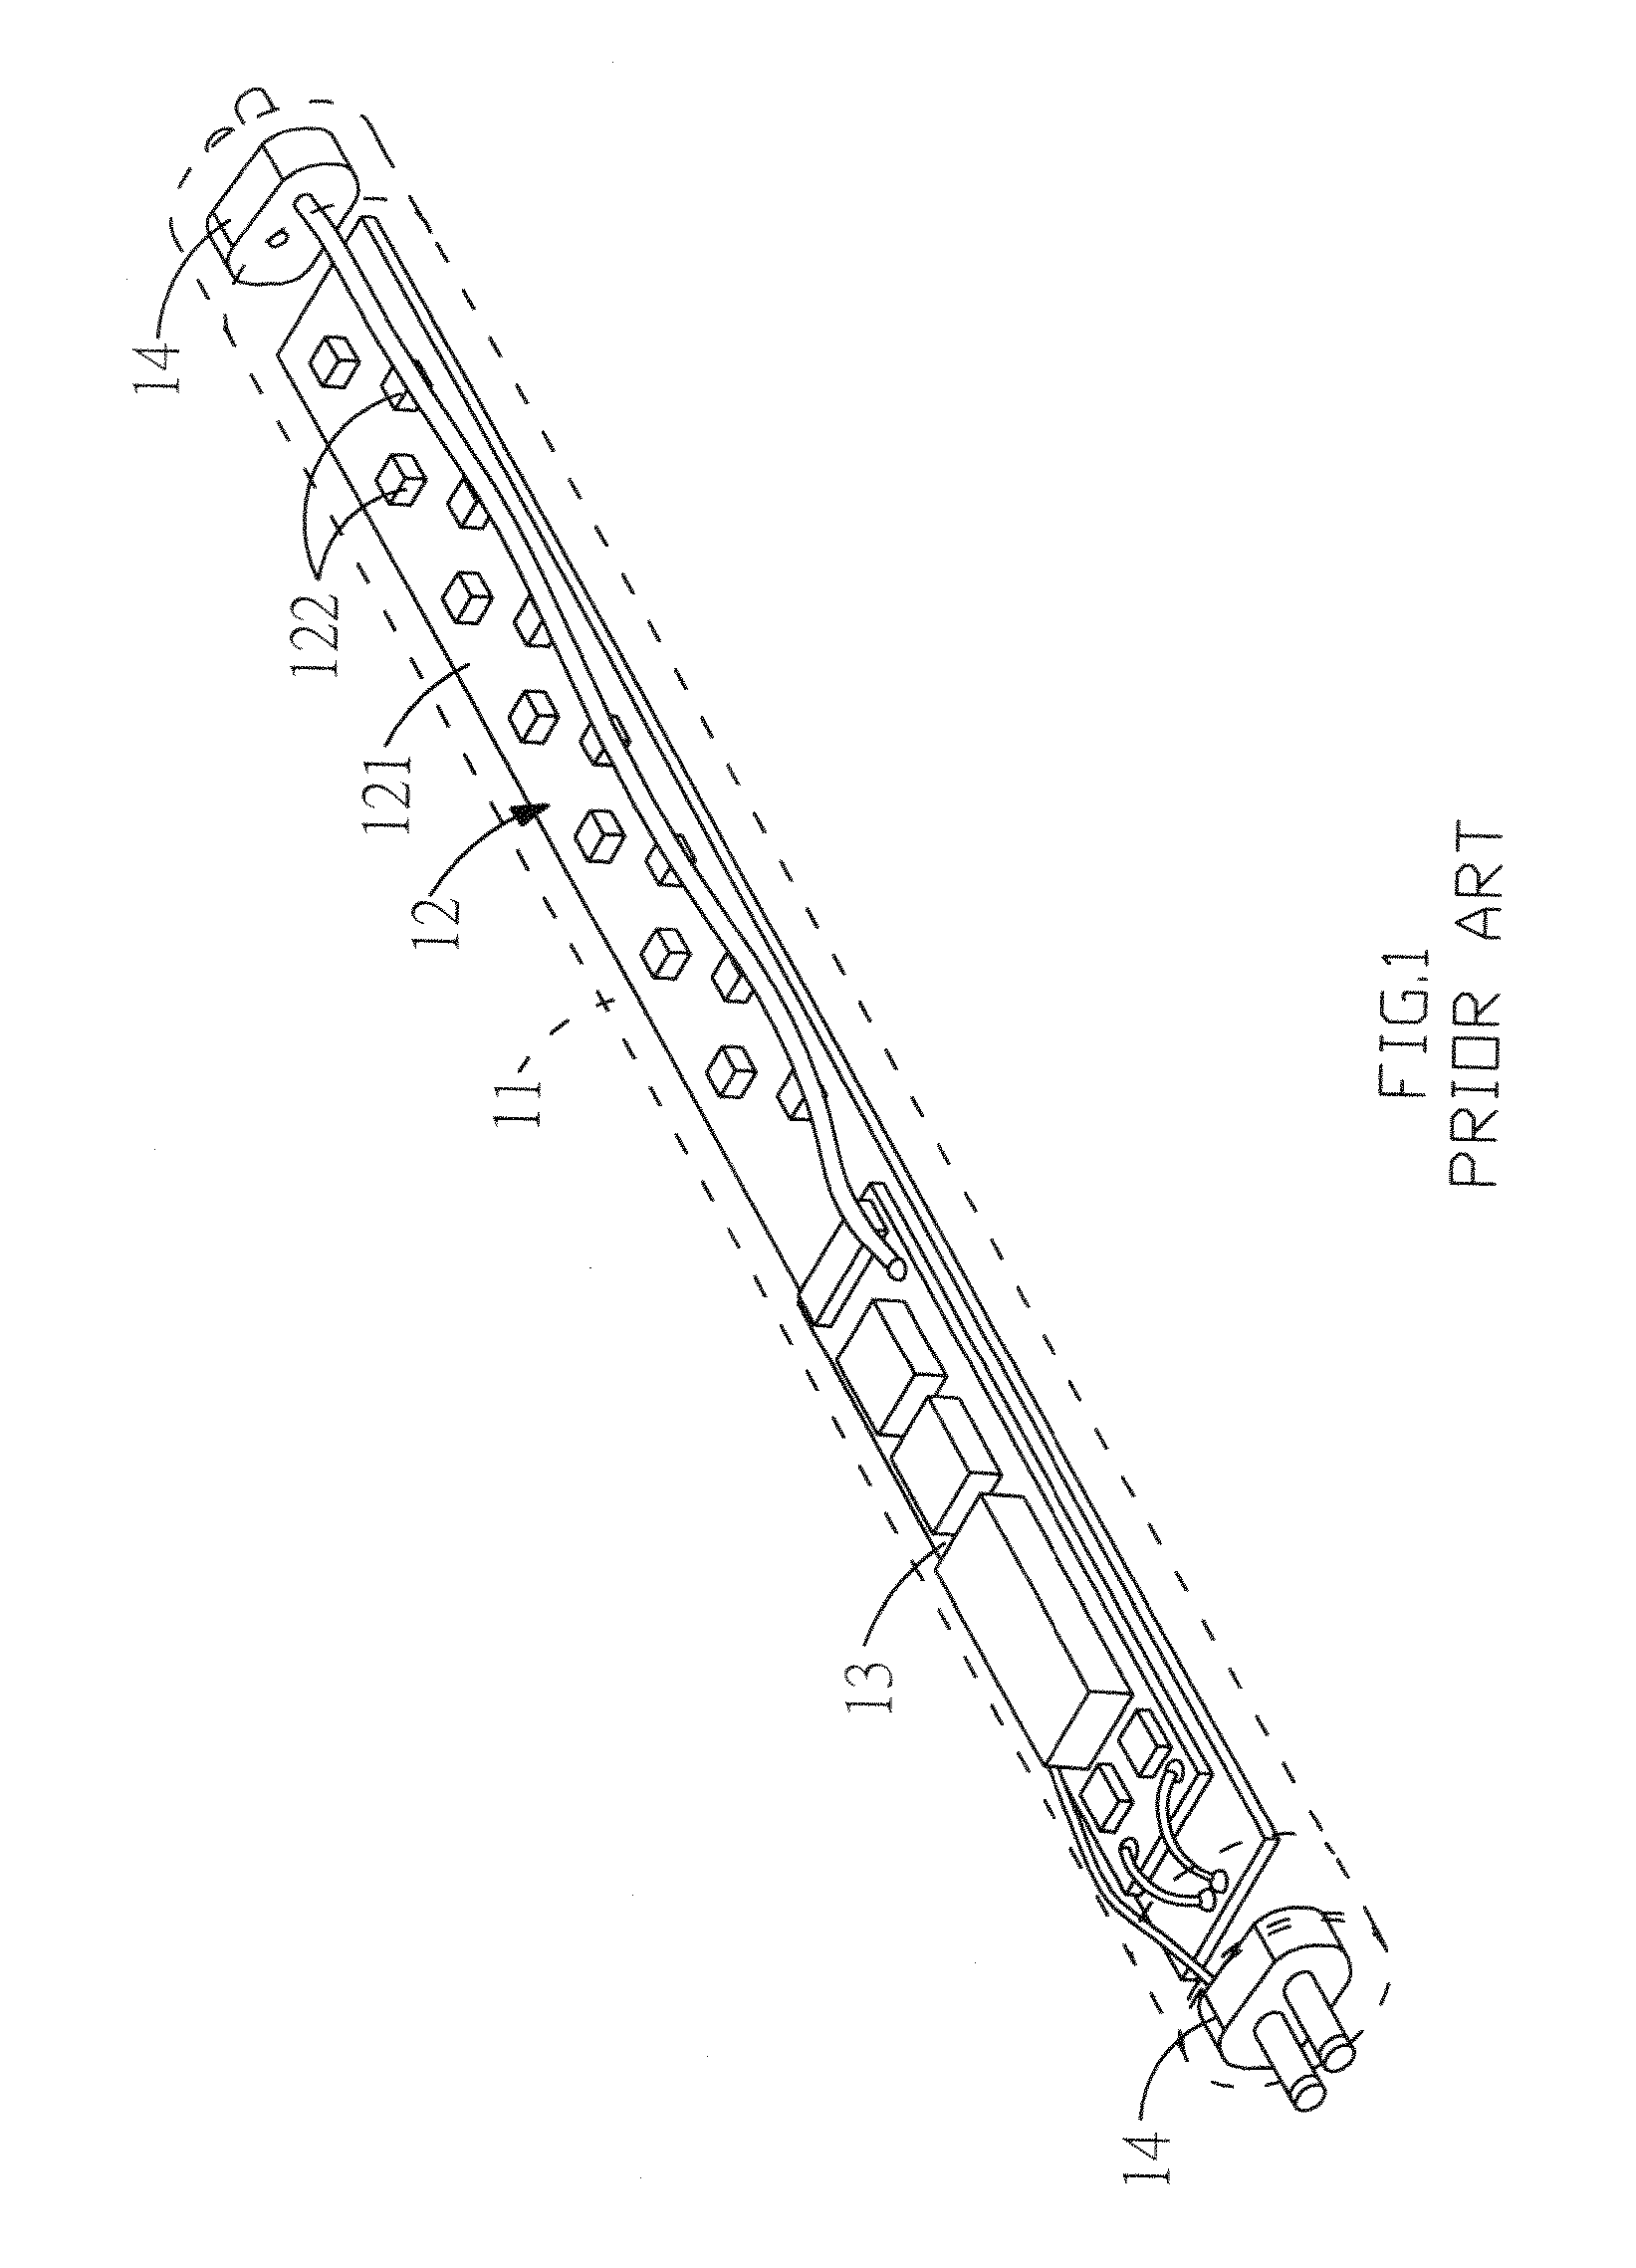 Separate LED Lamp Tube and Light Source Module Formed Therefrom